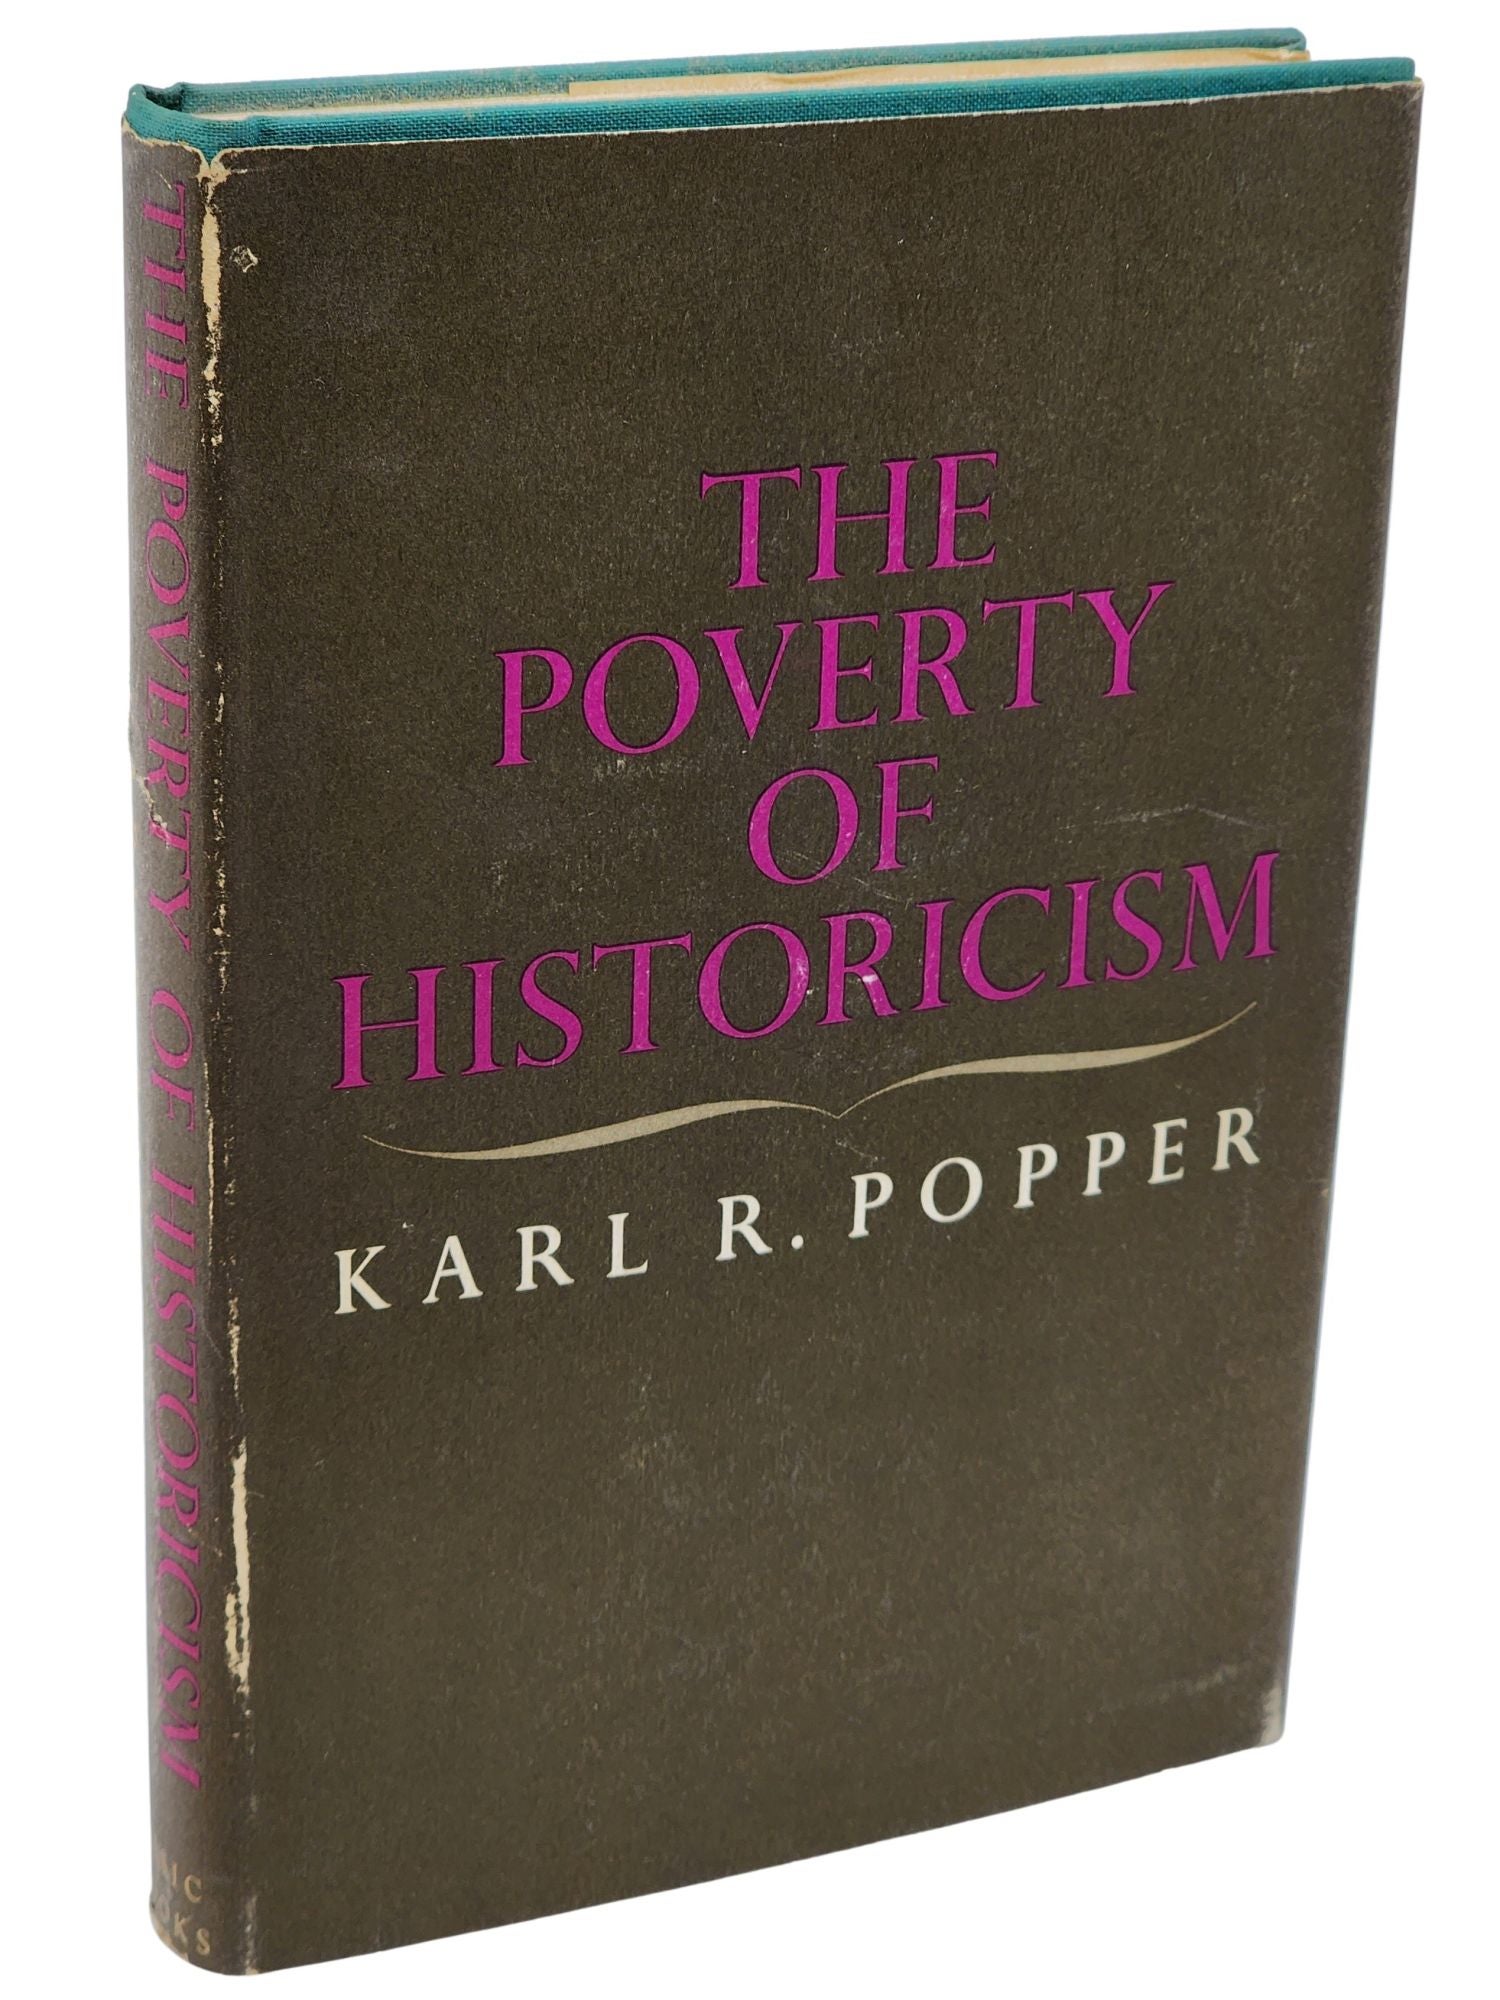 [Book #50962] THE POVERTY OF HISTORICISM. Karl R. Popper.